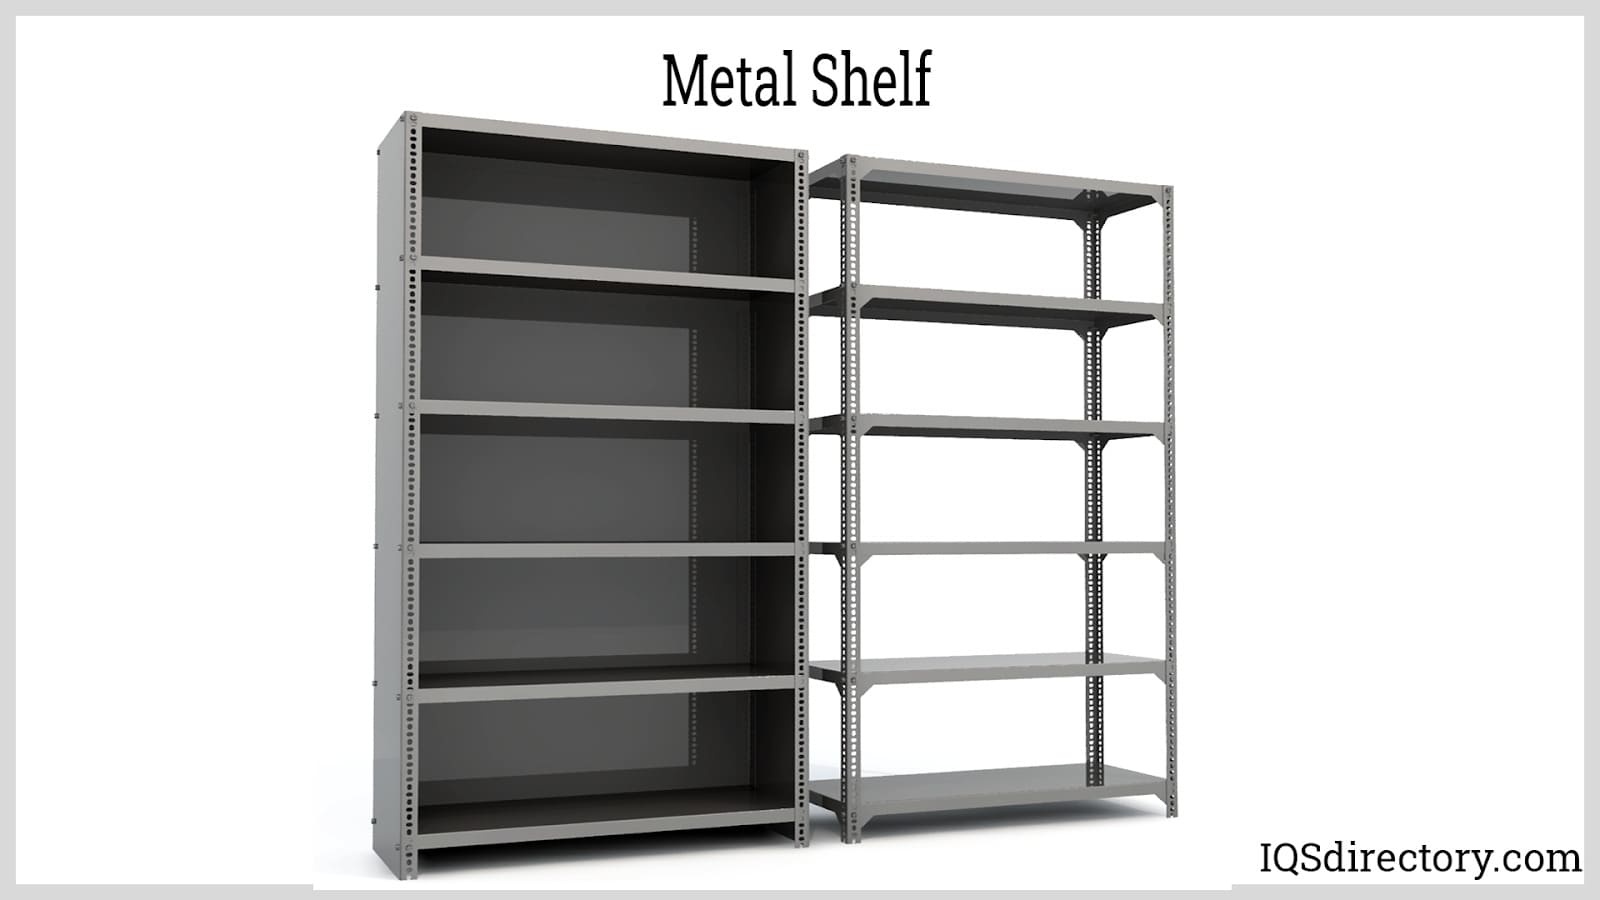 Furniture fittings Steel Galvanized metal shelf pegs to hold up